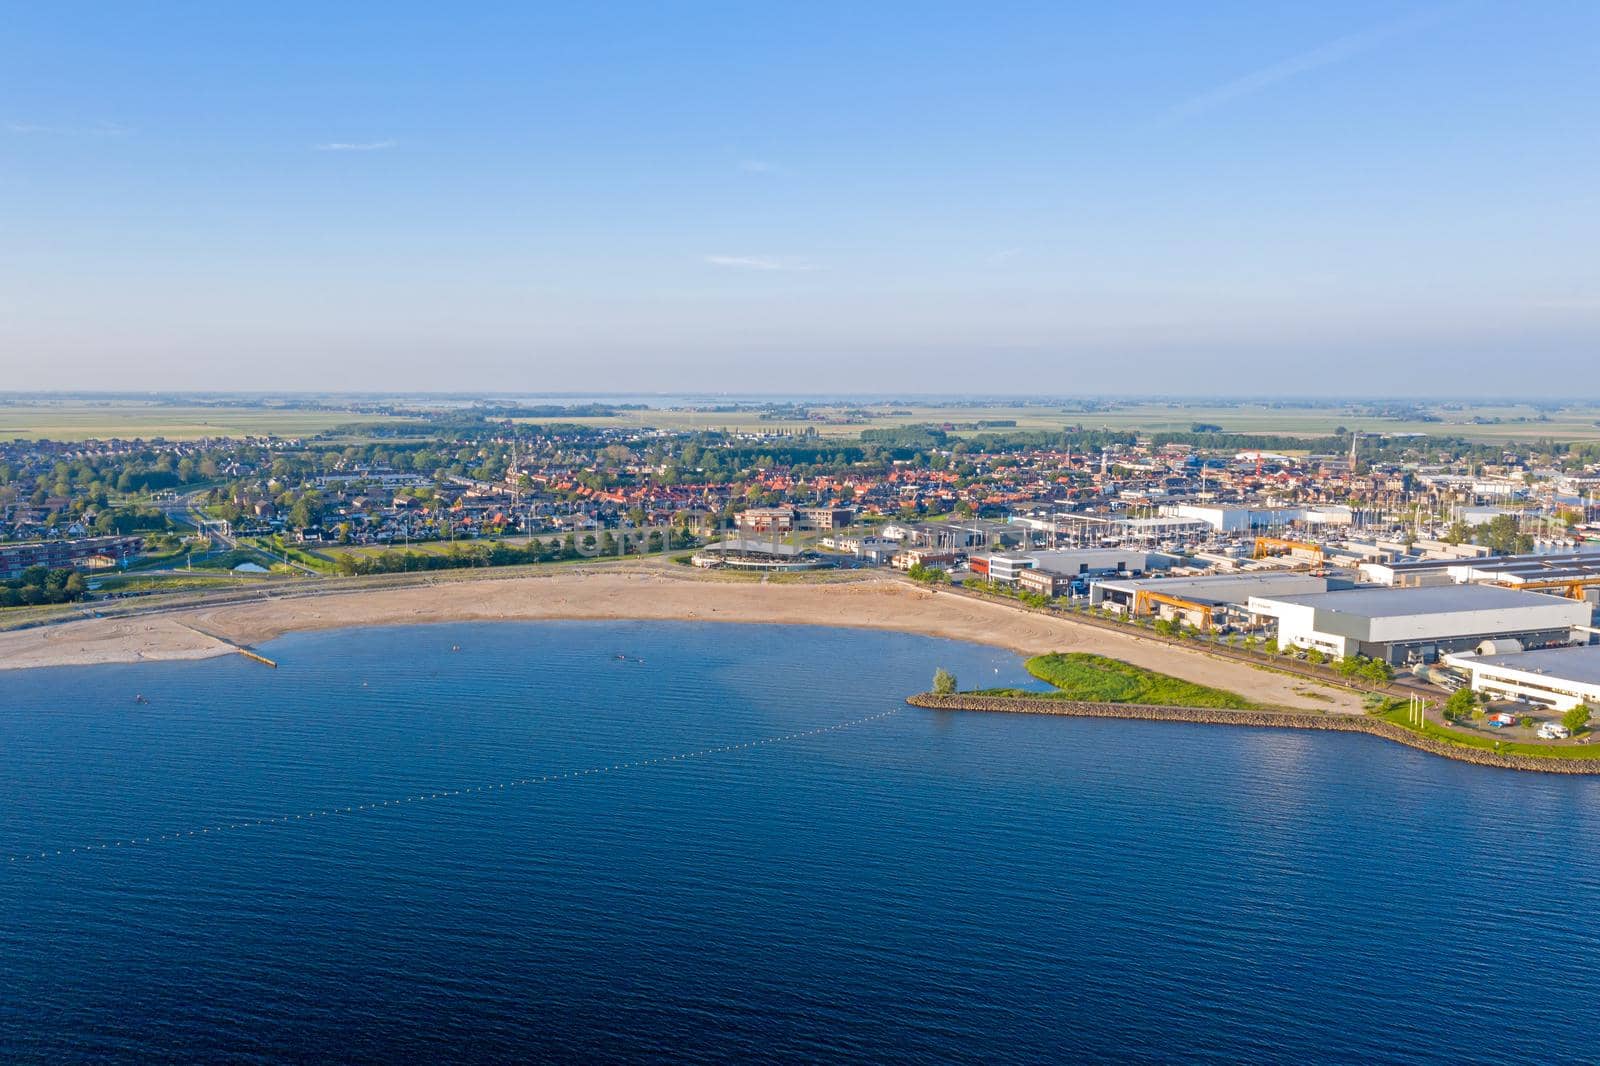 Aerial view on the beach and the city from Lemmer in the Netherlands